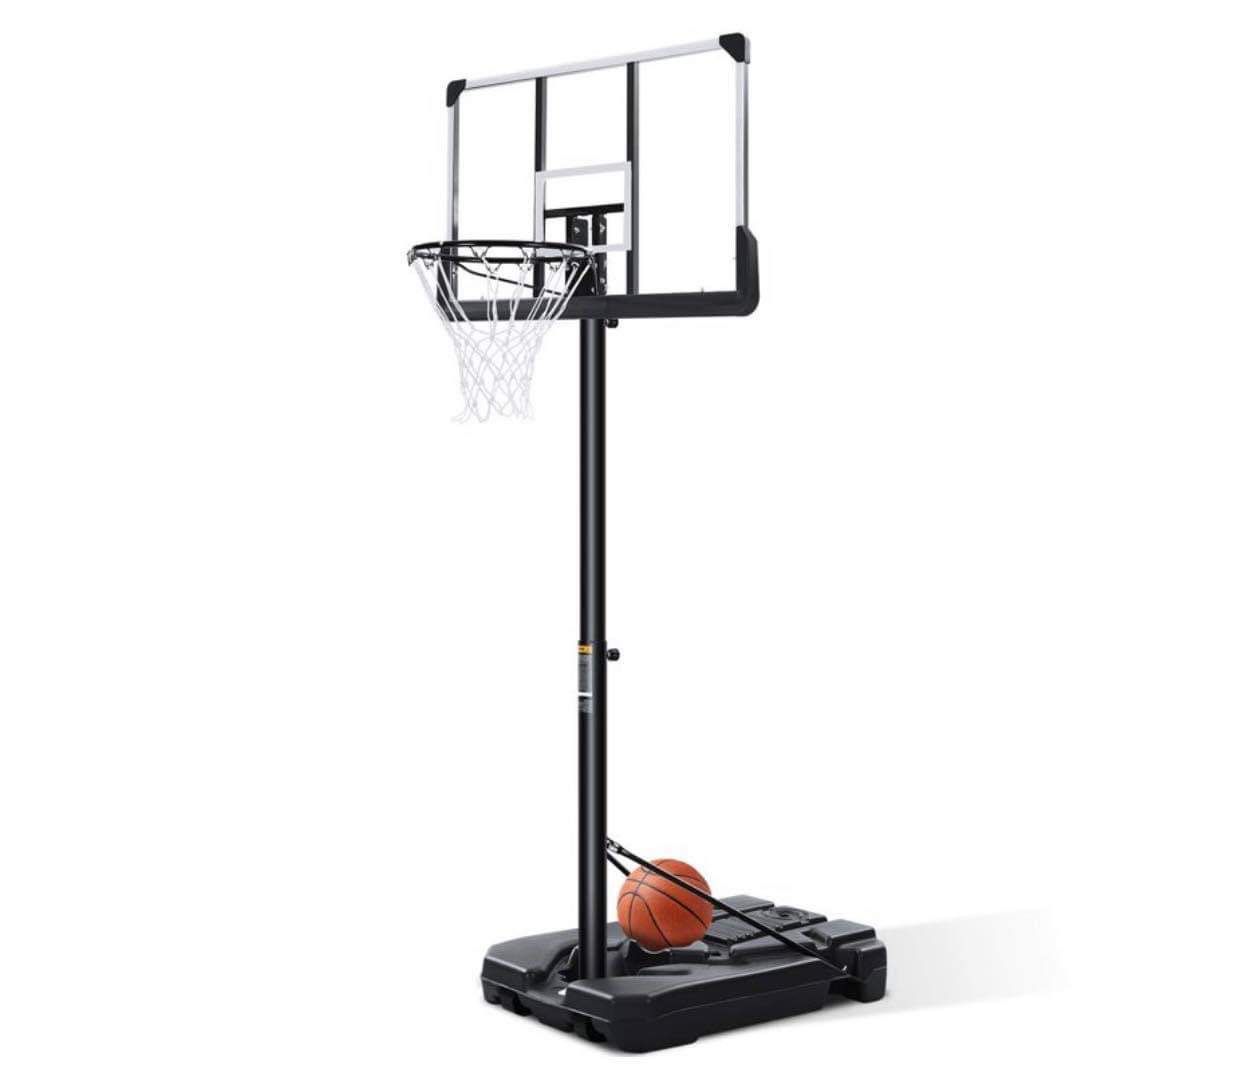 BRAND NEW🔥🔥🔥 MaxKare 44 In. Portable Basketball System Hoop and Goal 7 Ft. 6 In. - 10 Ft. Height Adjustable Stand with Wheels for Youth Kids Indoor